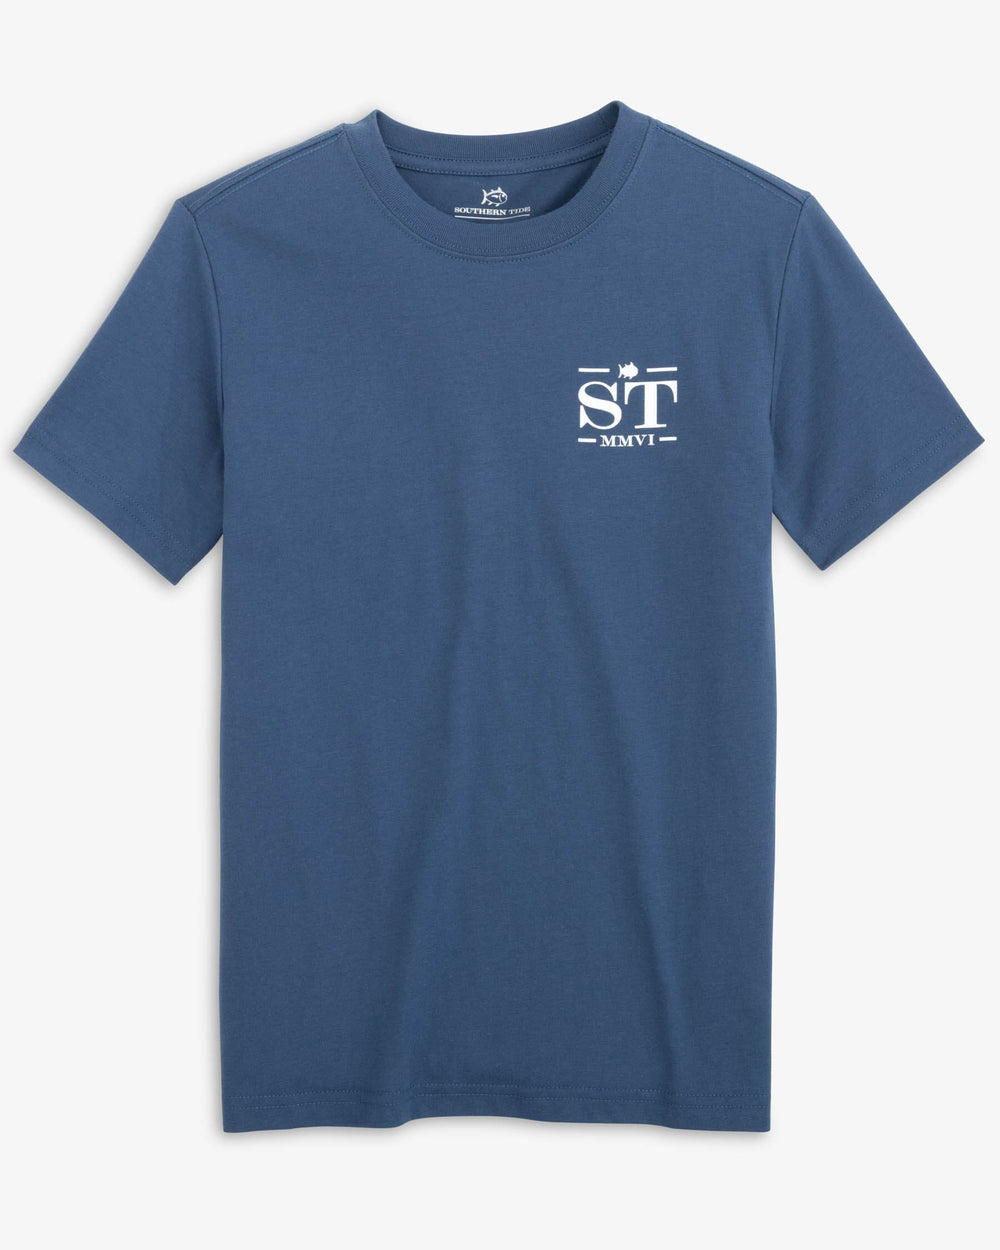 The front view of the Southern Tide Kid's All Inclusive Skipjack T-shirt by Southern Tide - Aged Denim